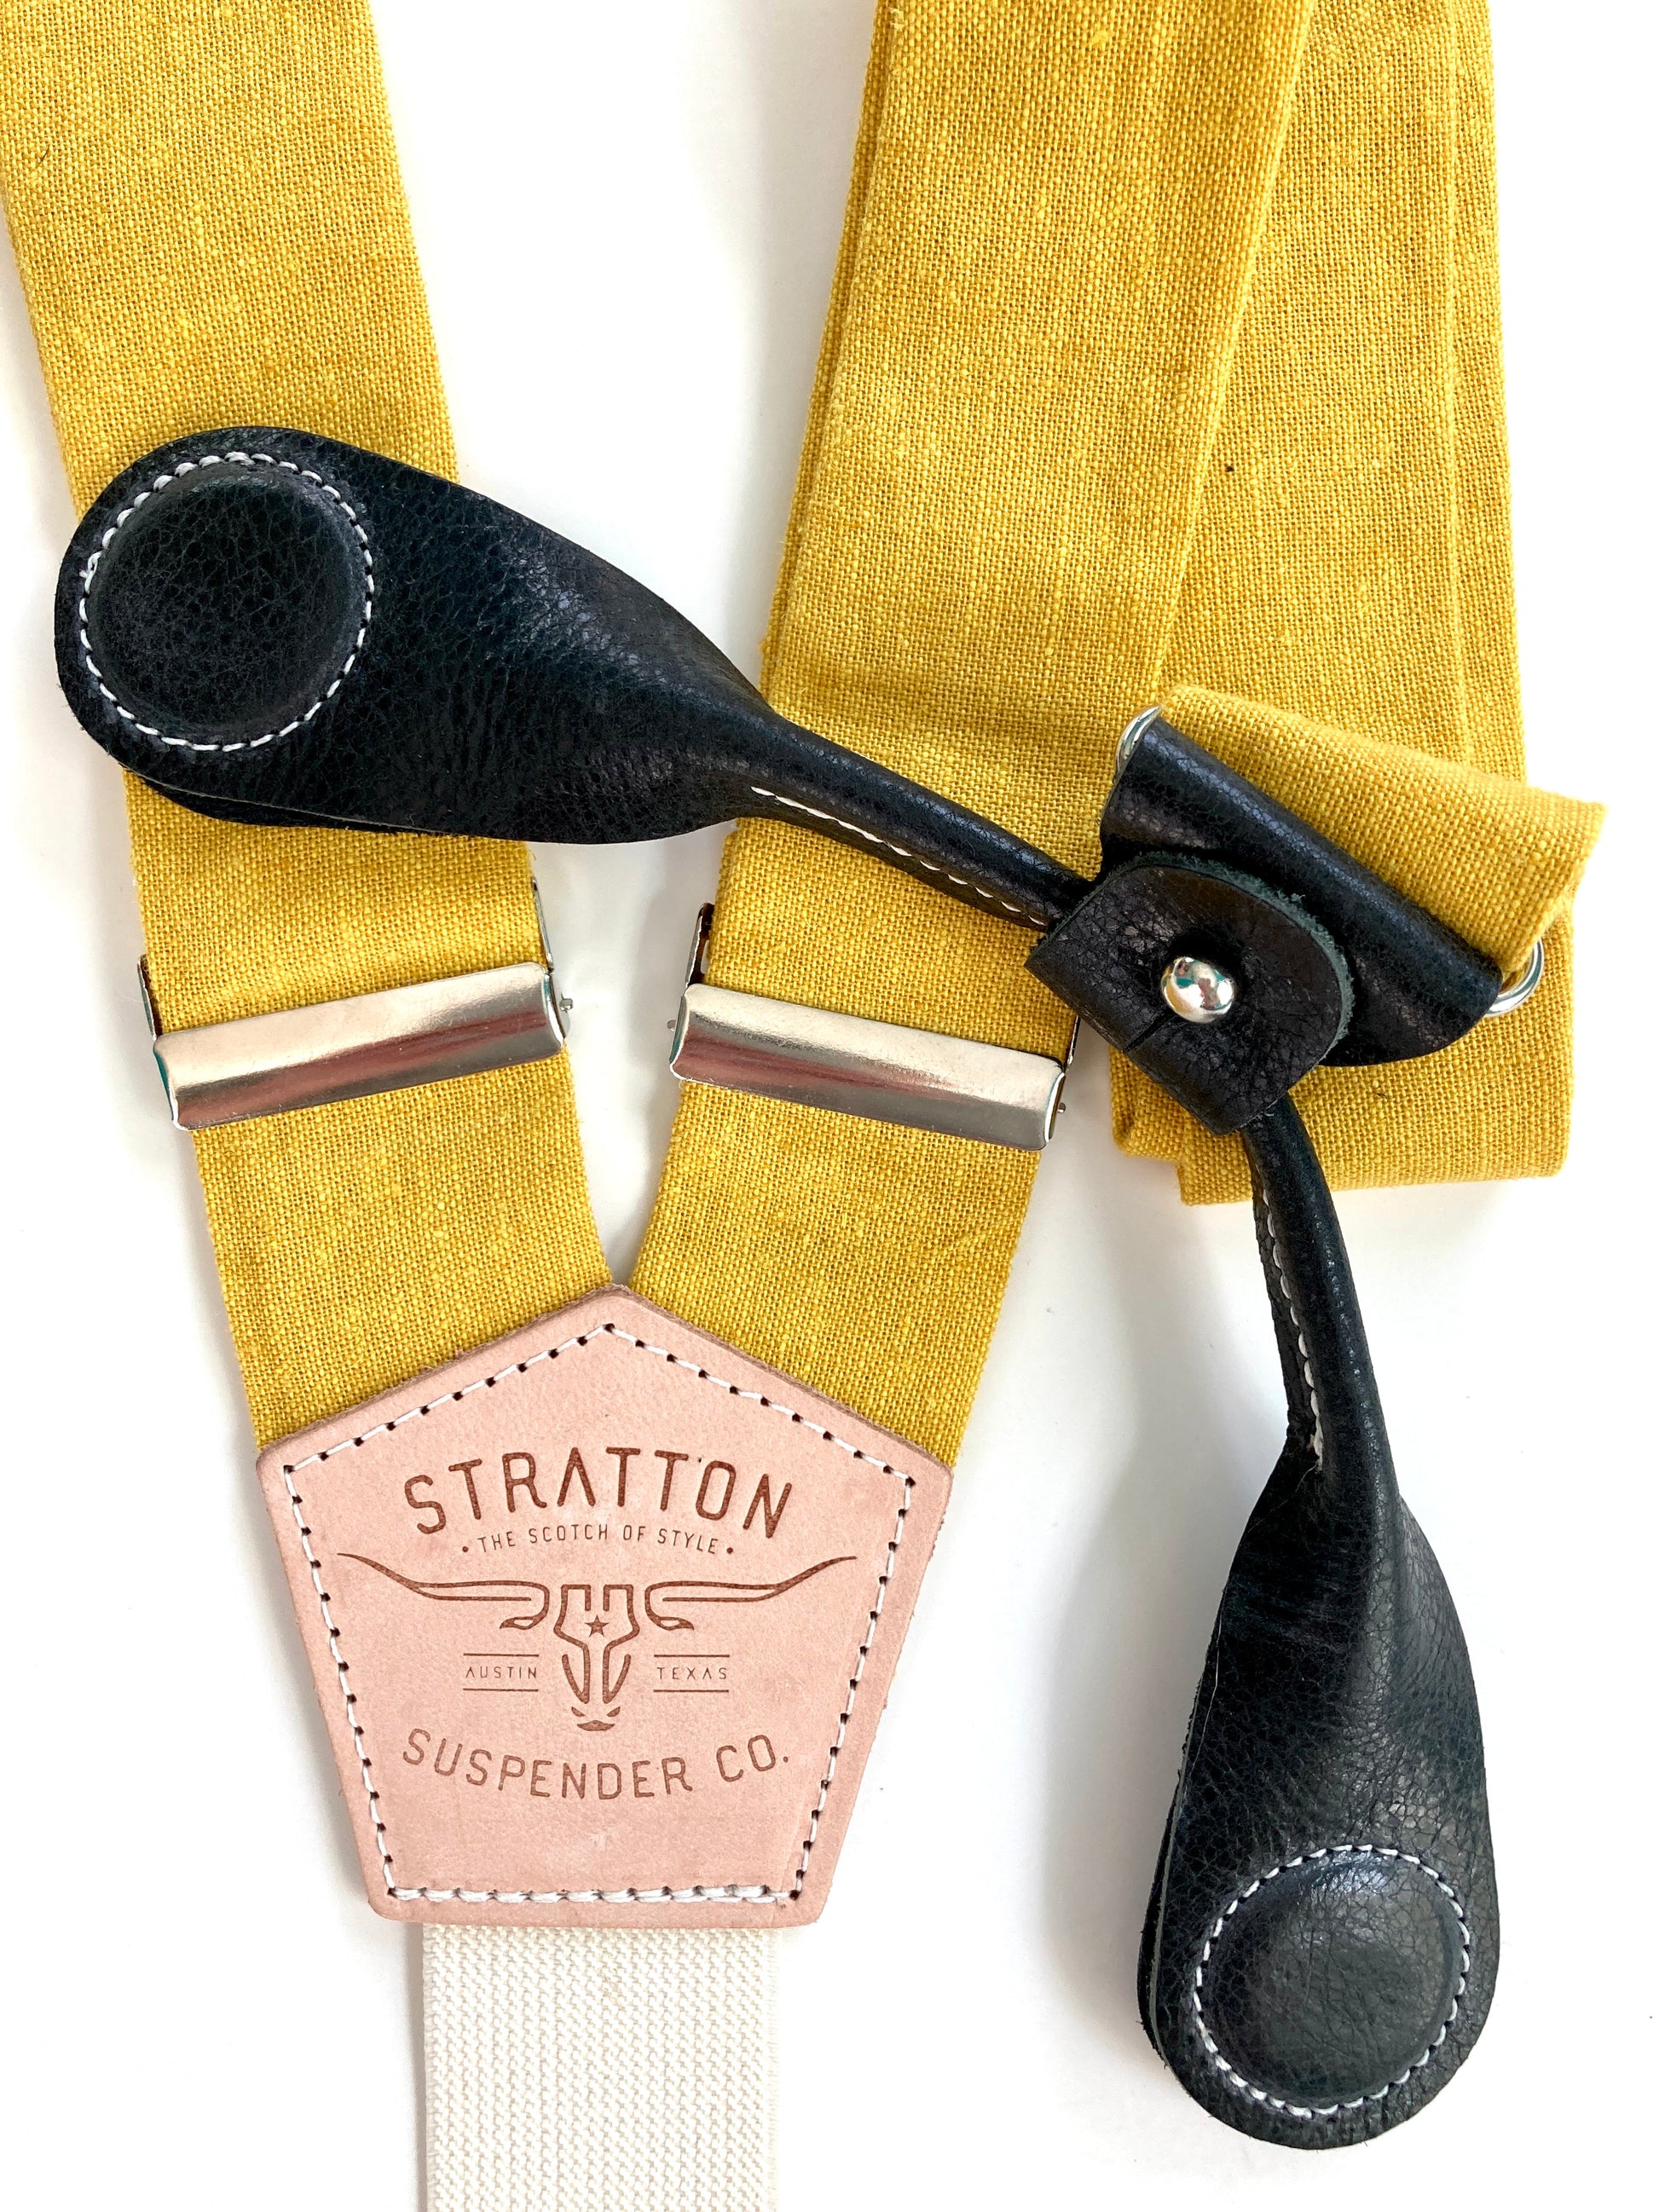 Stratton Suspender Co. features the Yellow linen suspenders on veg tan shoulder leather with cream colored elastic back strap for the Fall 2022 suspenders collection Magnetic Stratton Suspender clasps in Black Pontedero Italian leather hand-picked by Stratton Suspender Co.